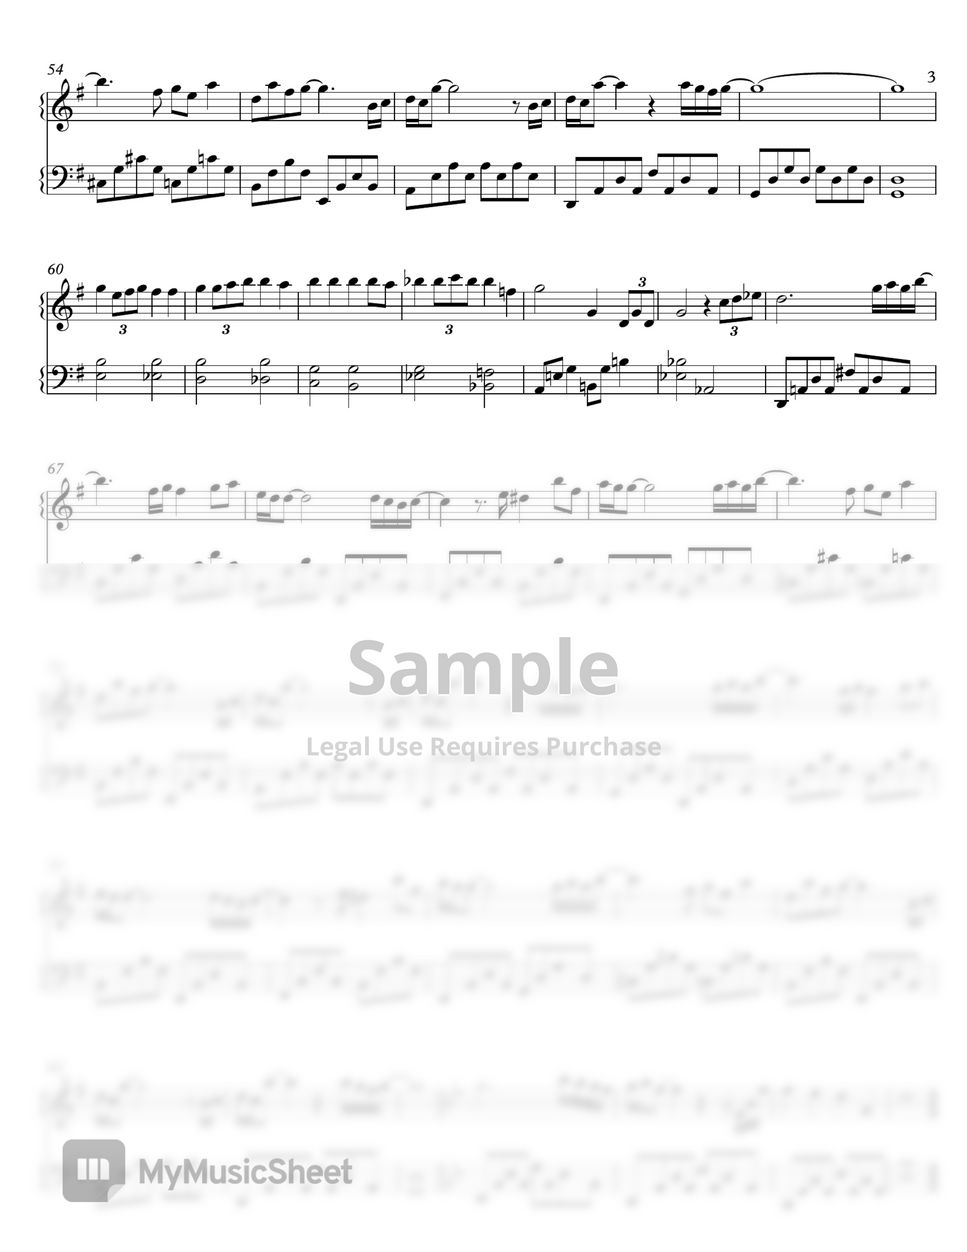 Baka Mitai Sheet Music - 5 Arrangements Available Instantly - Musicnotes